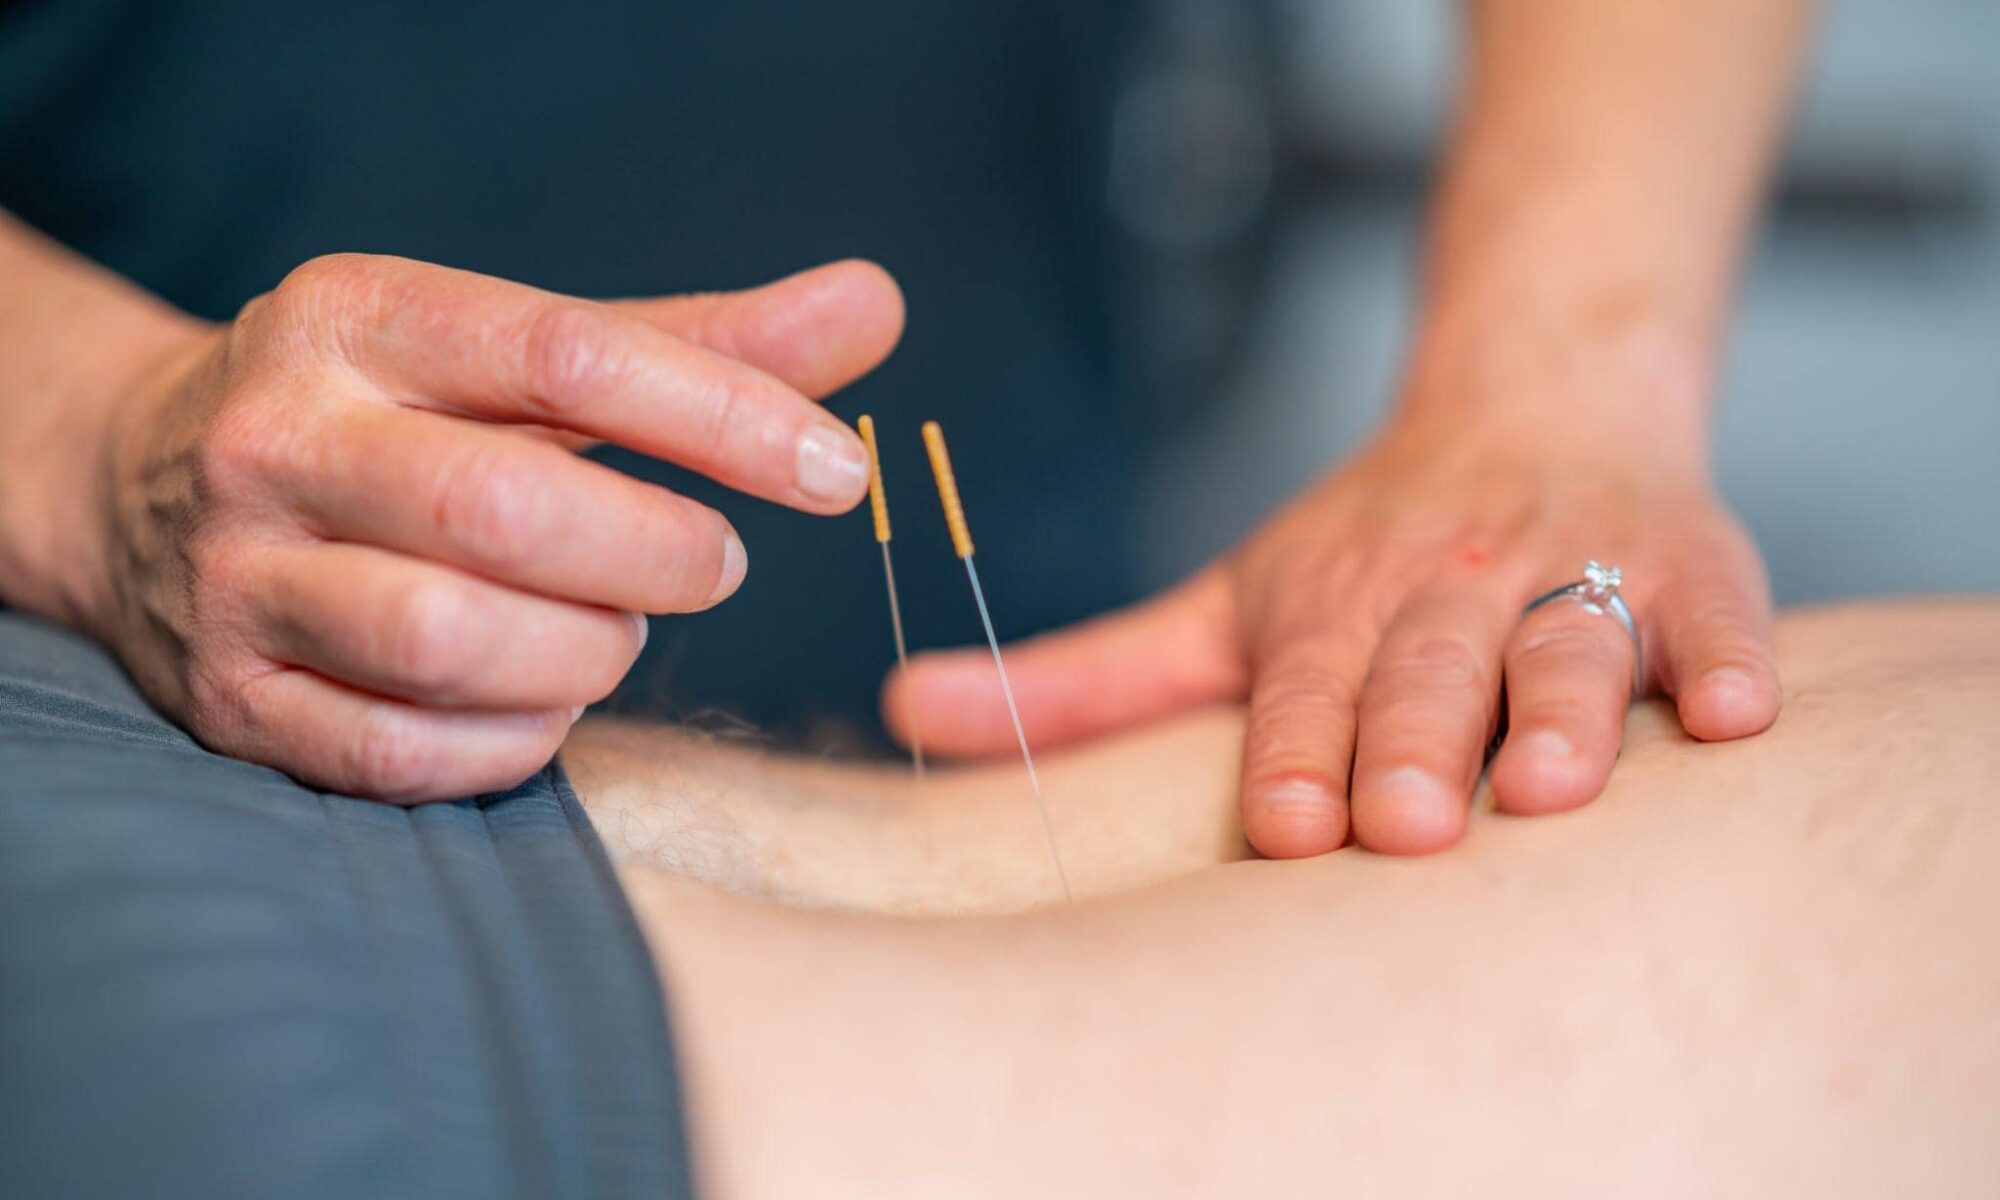 Dry needling to treat muscle pain